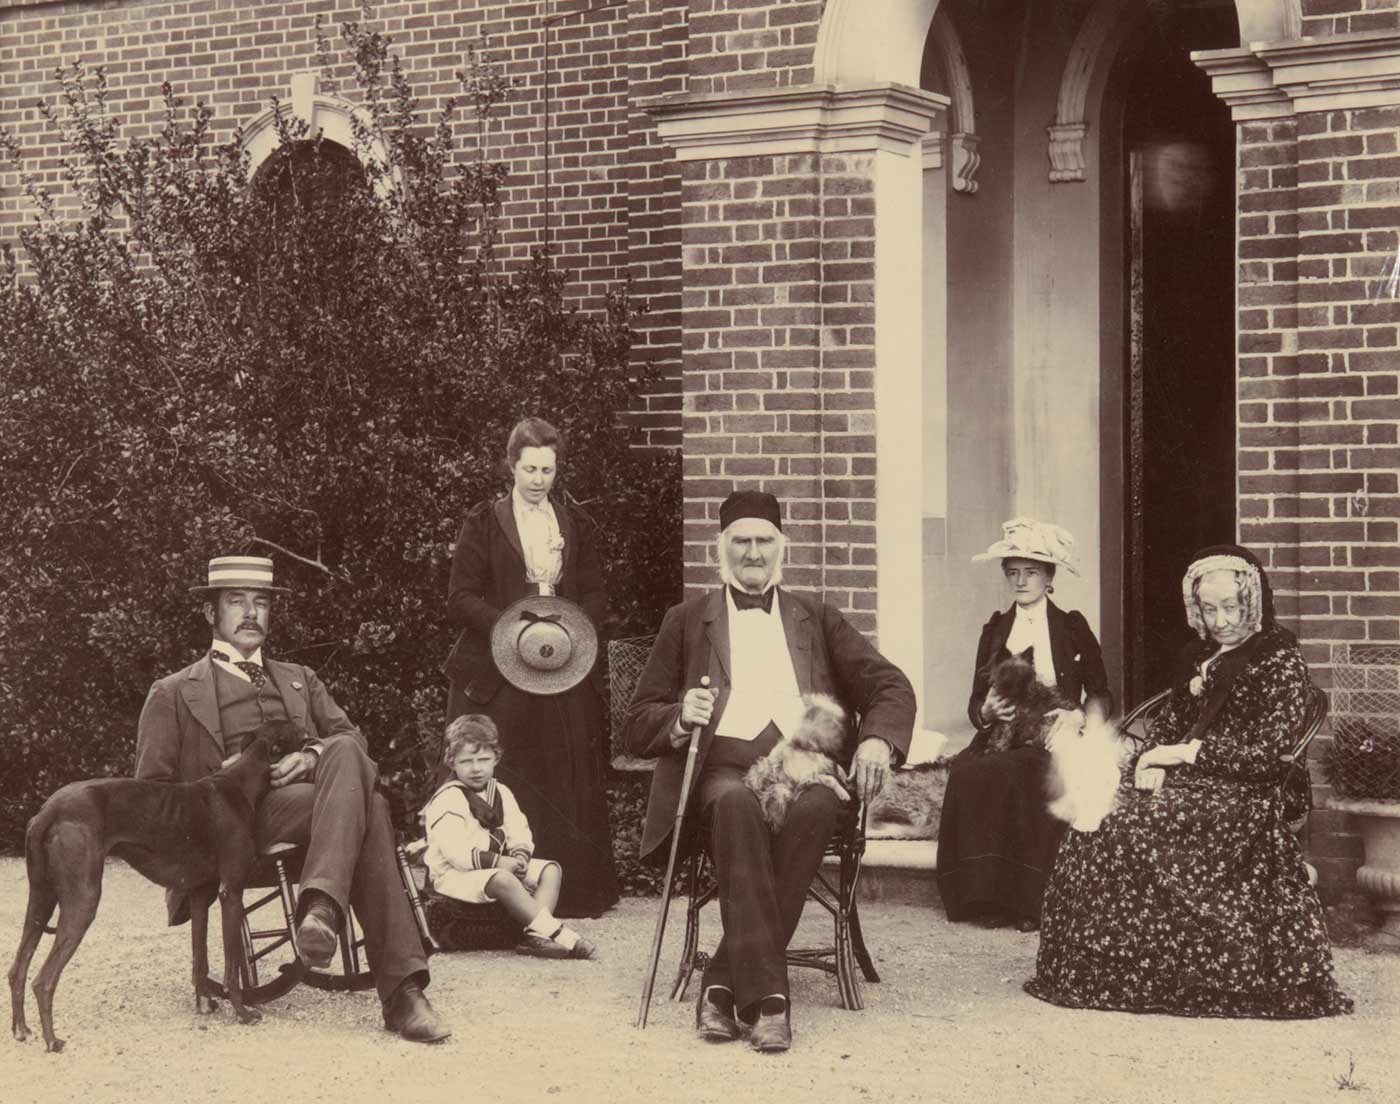 Black and white photo showing two men, three women and a child outside a brick building. The man at centre holds a walking stick and has a small dog sitting on this lap. The other man sits in a rocking chair, with the head of a kangaroo dog resting on his lap. To his right is a small boy in a sailor suit, and a woman, standing, who is looking down. The women seated, far right, both hav animals resting on their laps. - click to view larger image